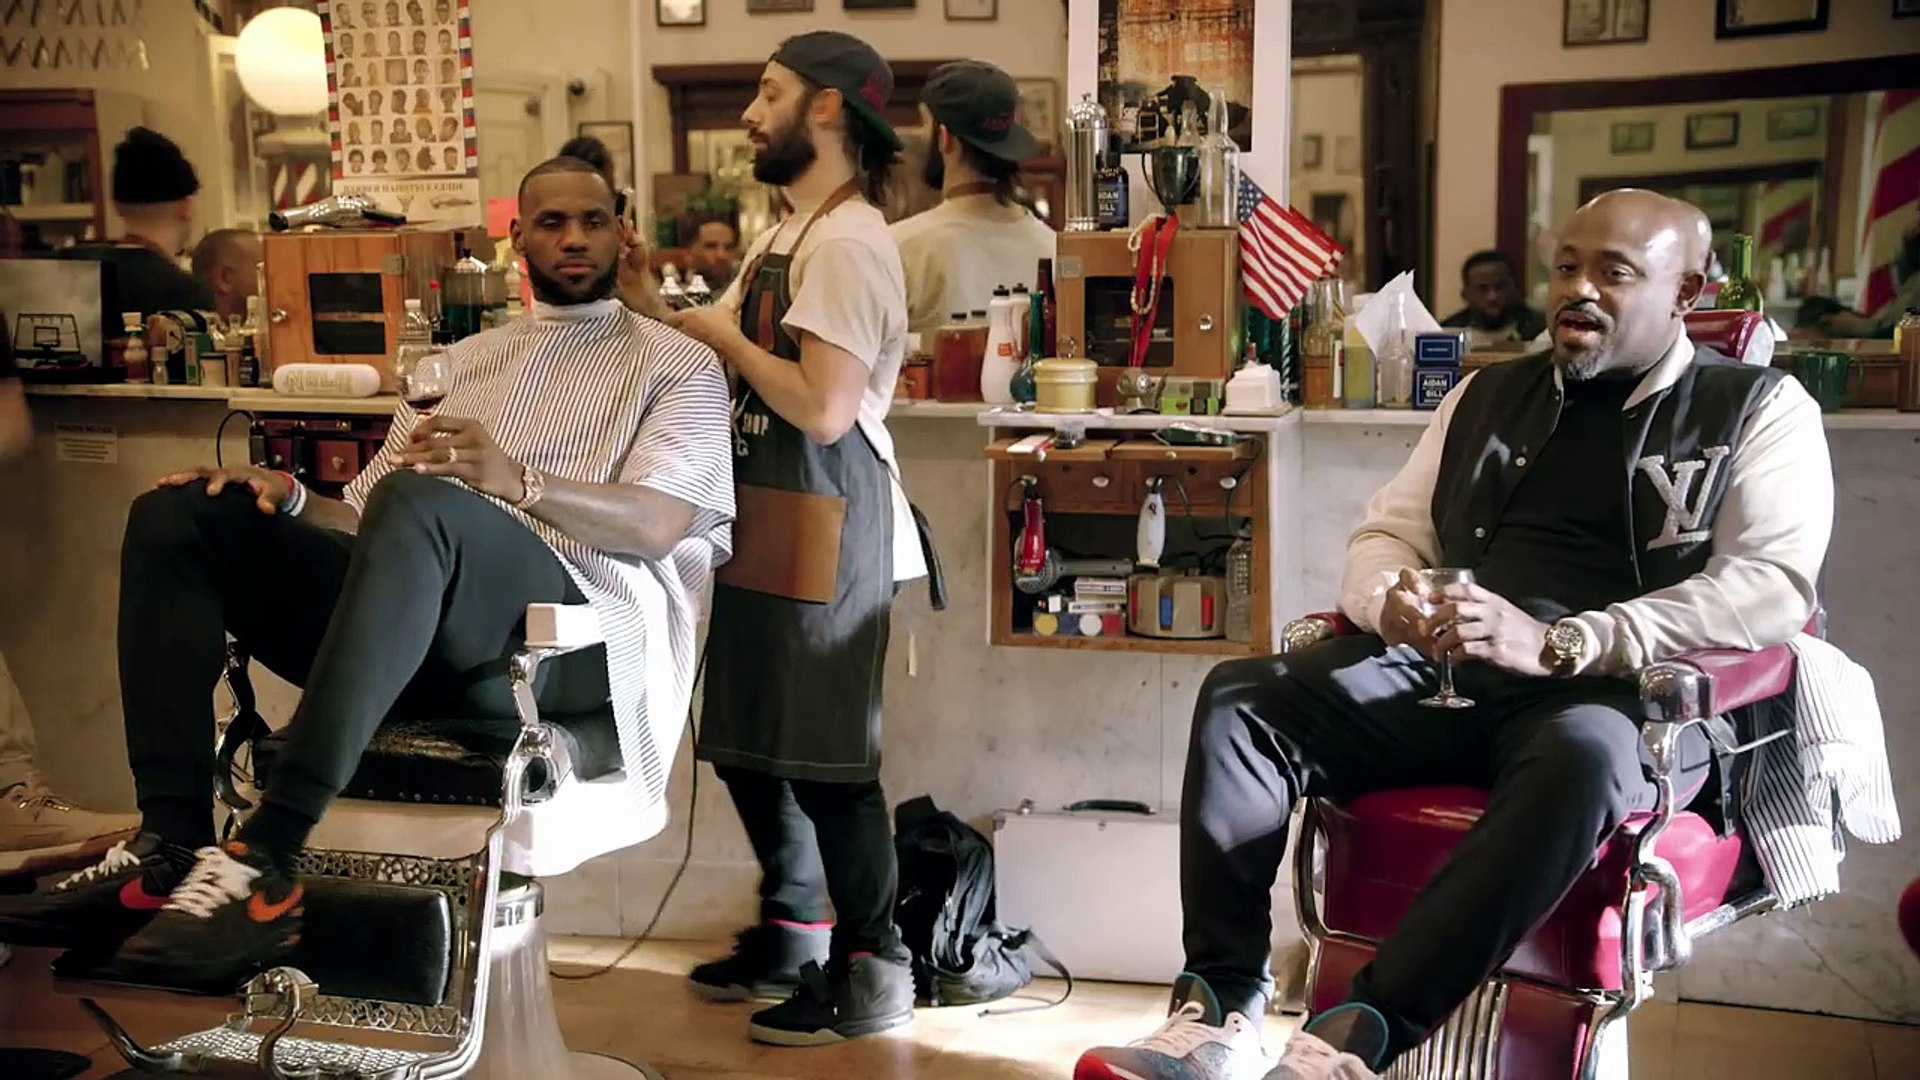 A Tuesday Night Memo: Thoughts on TV: NBA's LeBron James is unfiltered on  HBO's The Shop – In the barbershop you can't lie.